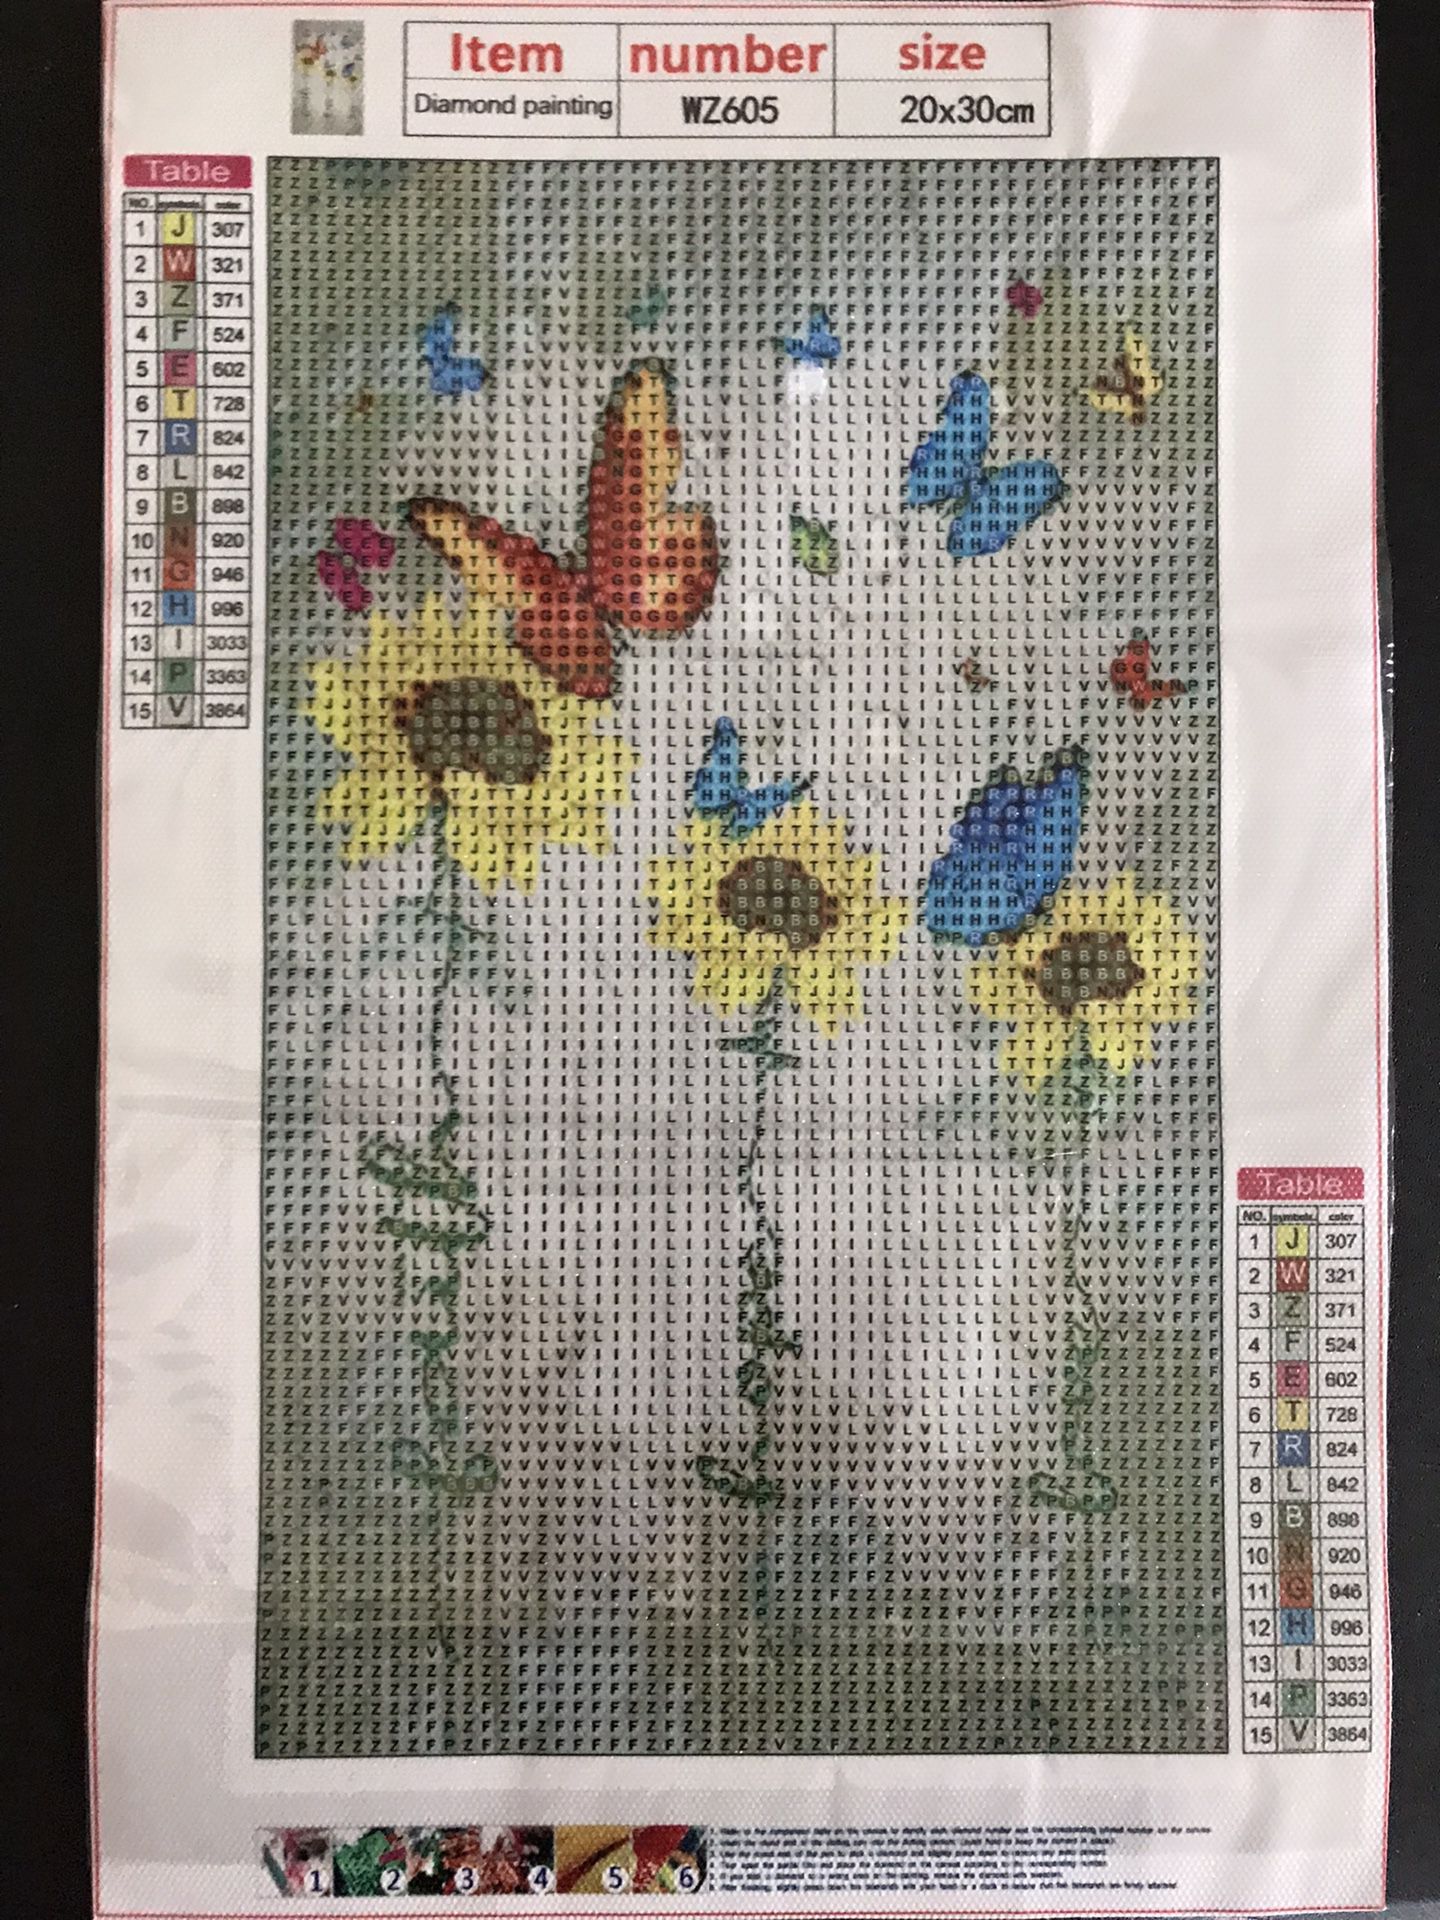 New Diamond Painting Kit Flowers With Butterflies 